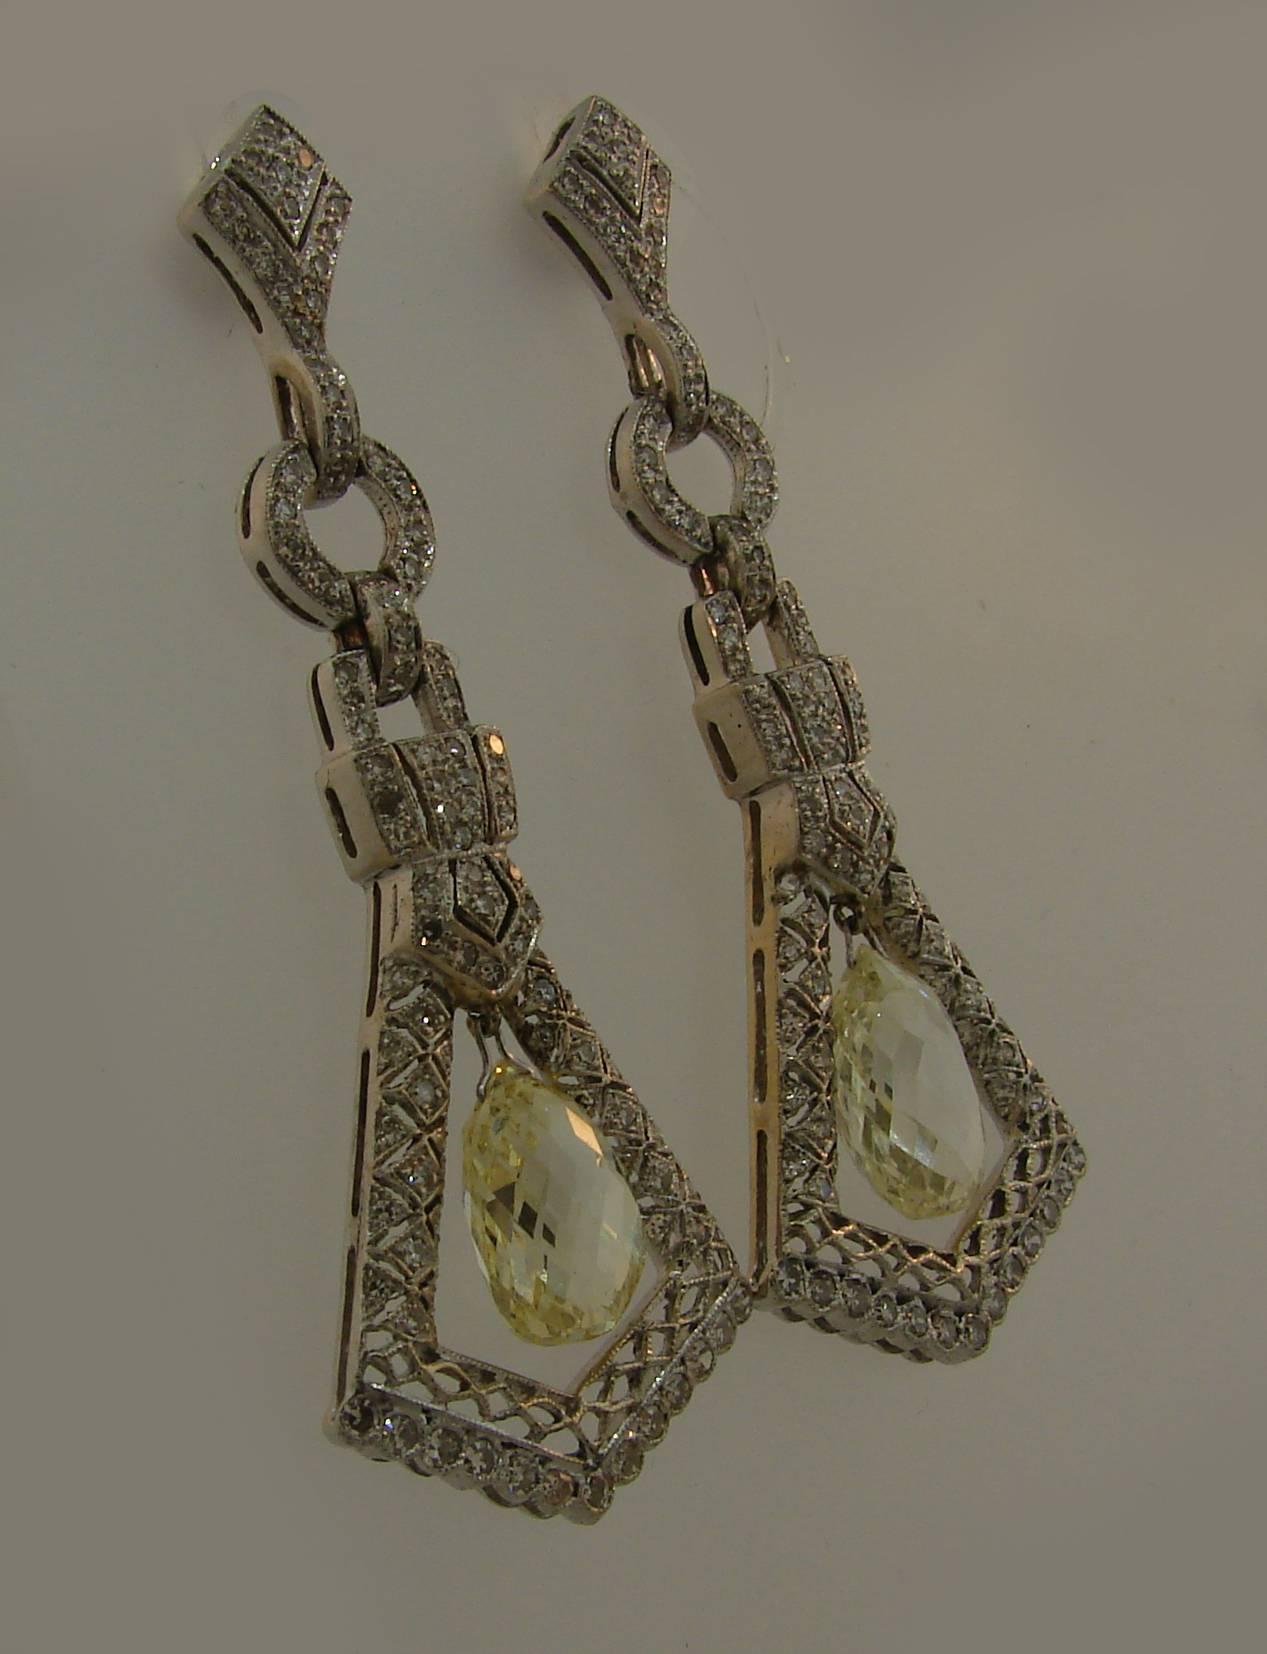 A pair of fabulous dangle earrings featuring two diamond briolettes set in 14 karat (tested) white gold. The briolettes measure 10.91 x 6.92 x 5.10 mm (P color, VS2 clarity) and 11.54 x 7.44 4.92 mm (L color, VS2 clarity). The earrings are encrusted